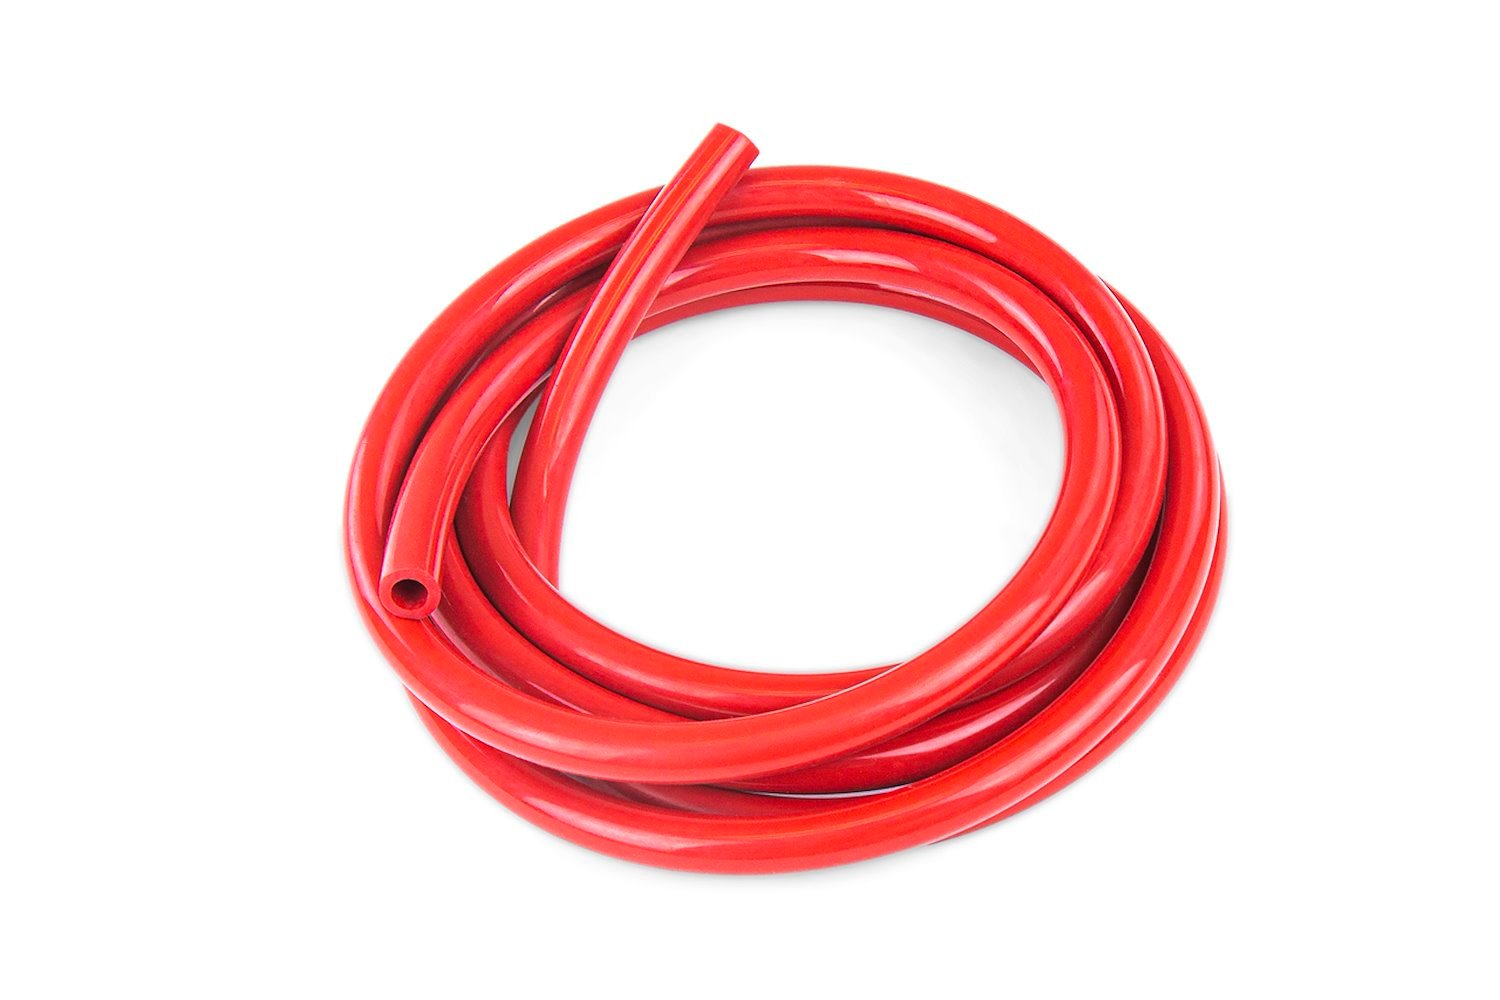 HTSVH6-REDx25 High-Temperature Silicone Vacuum Hose Tubing, 1/4 in. ID, 25 ft. Roll, Red